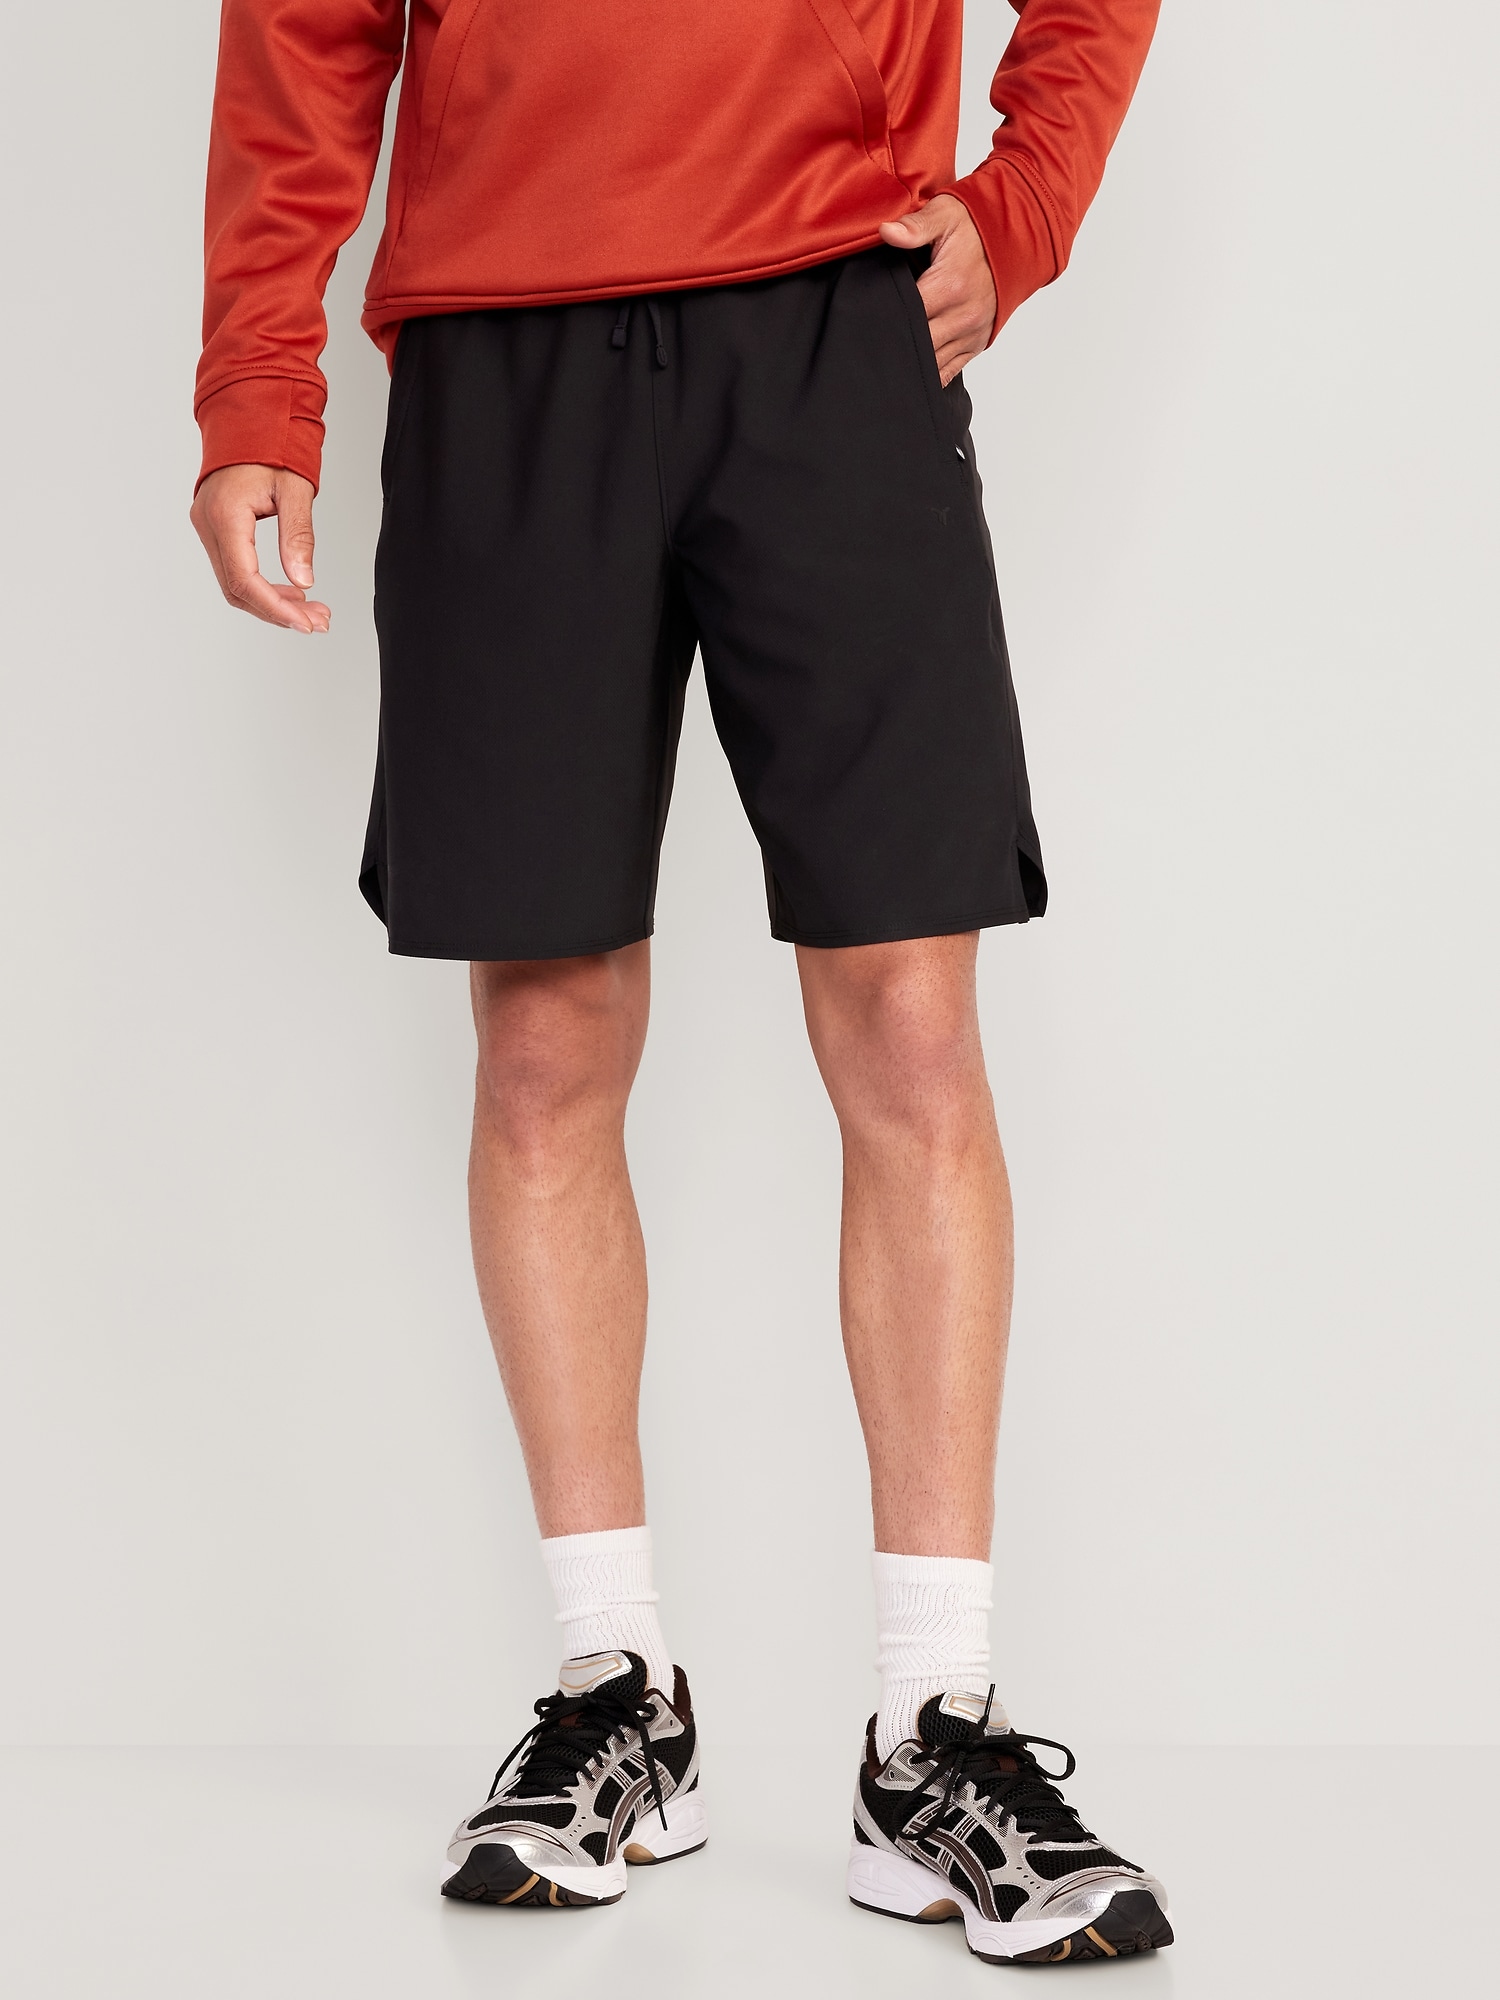 Go Workout Shorts -- 9-inch inseam Hot Deal